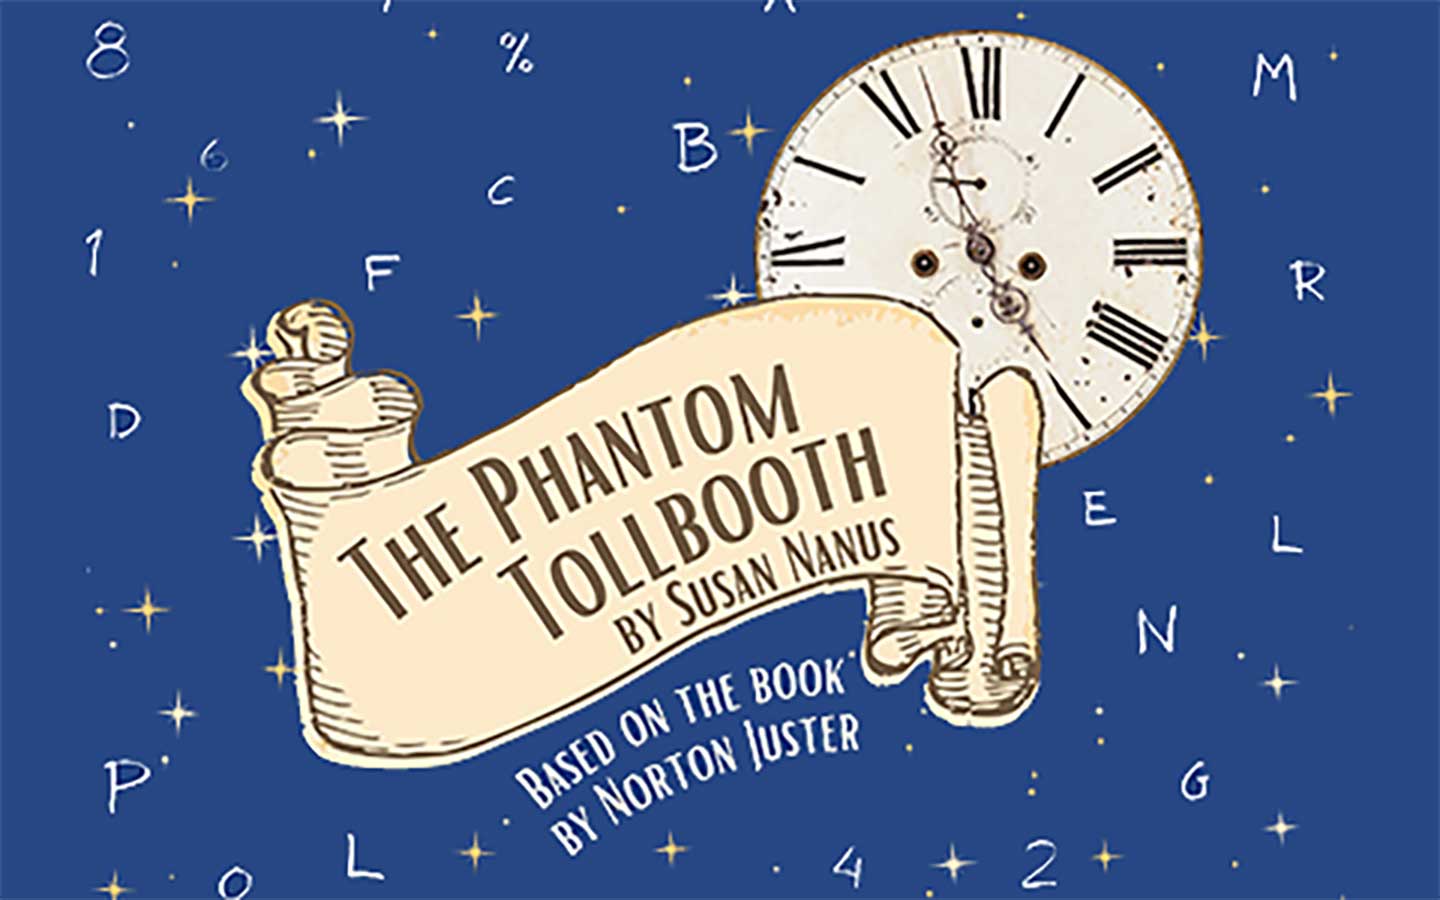 The Phantom Tollbooth by Susan Nanus, based on the book by Norton Juster